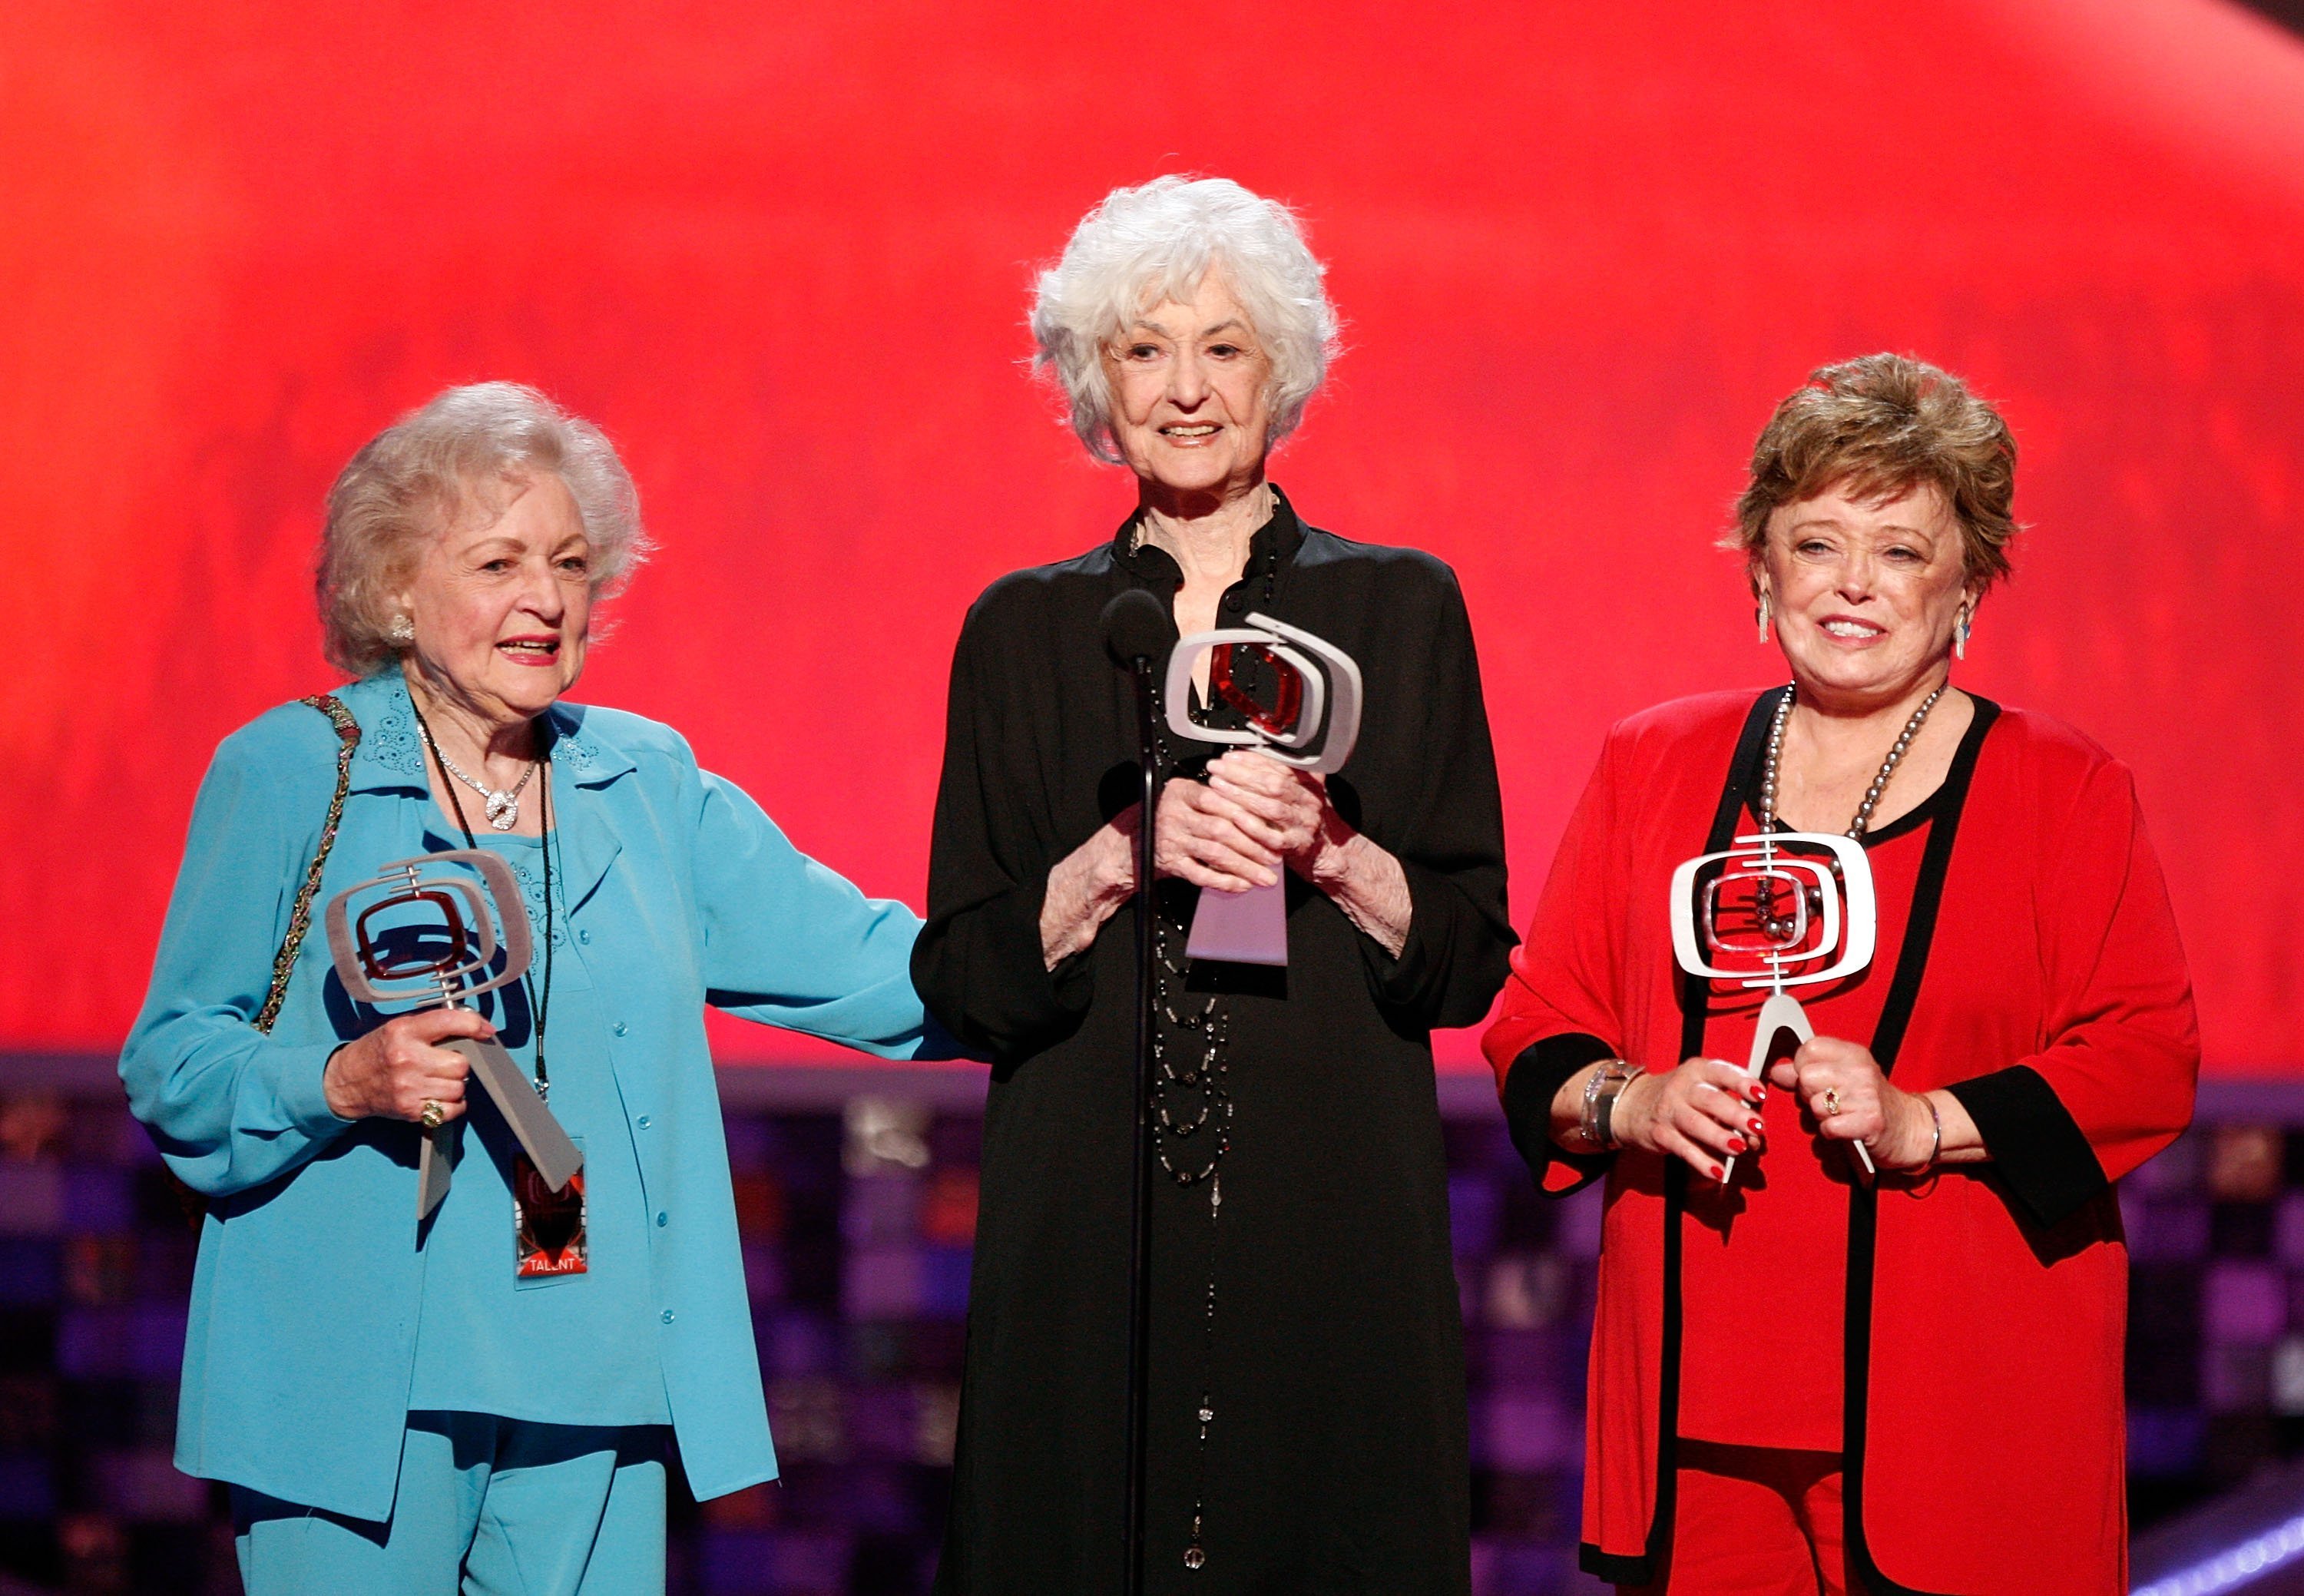 Betty White and her "Golden Girls" co-stars Bea Arthur and Rue McClanahan. I Image: Getty Images.